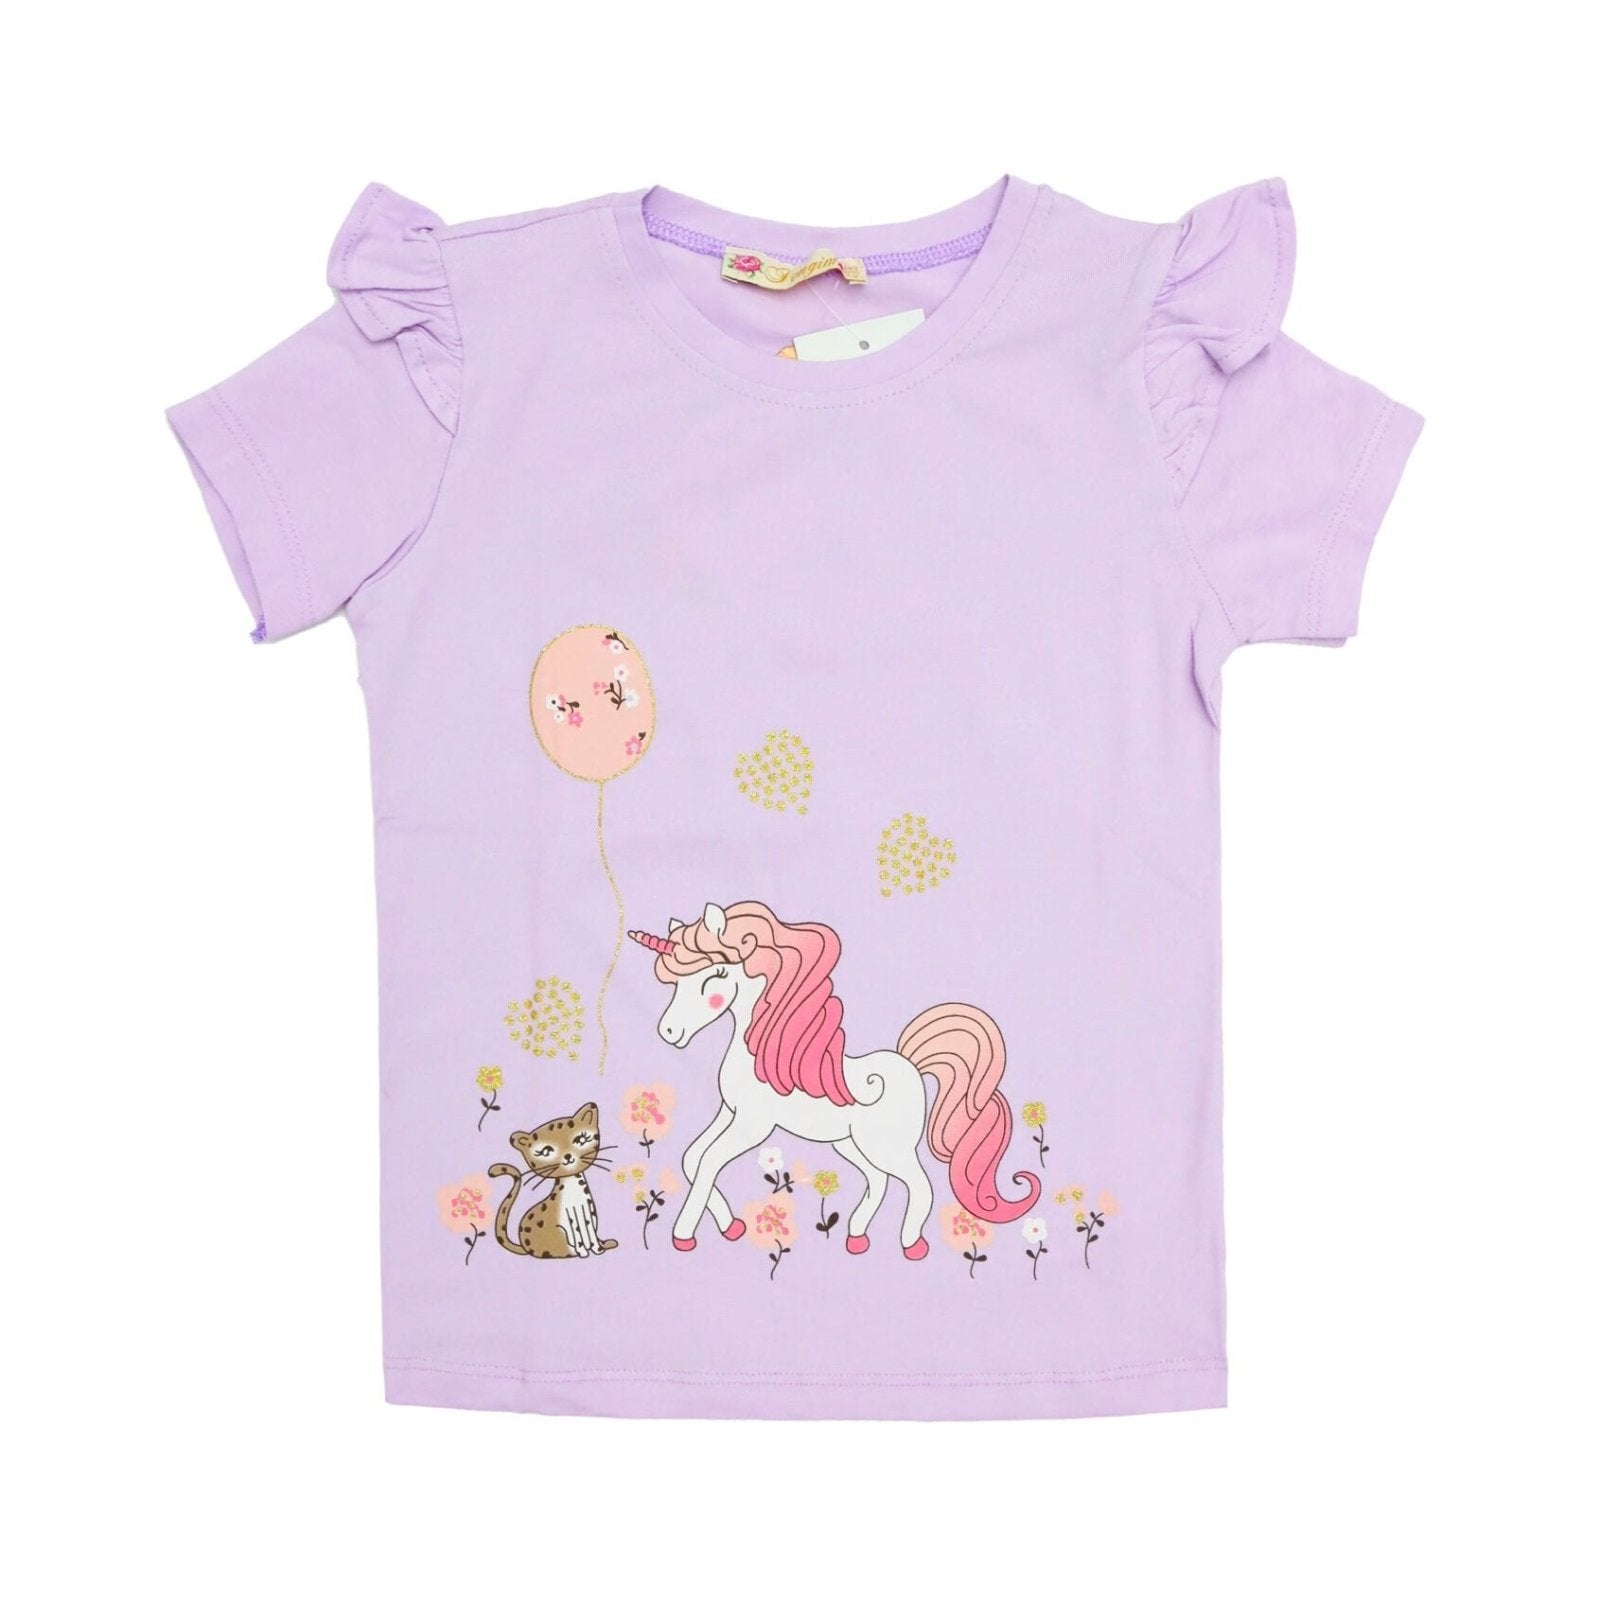 Girls Shirt Unicorn Print Purple Color by Made in Turkey